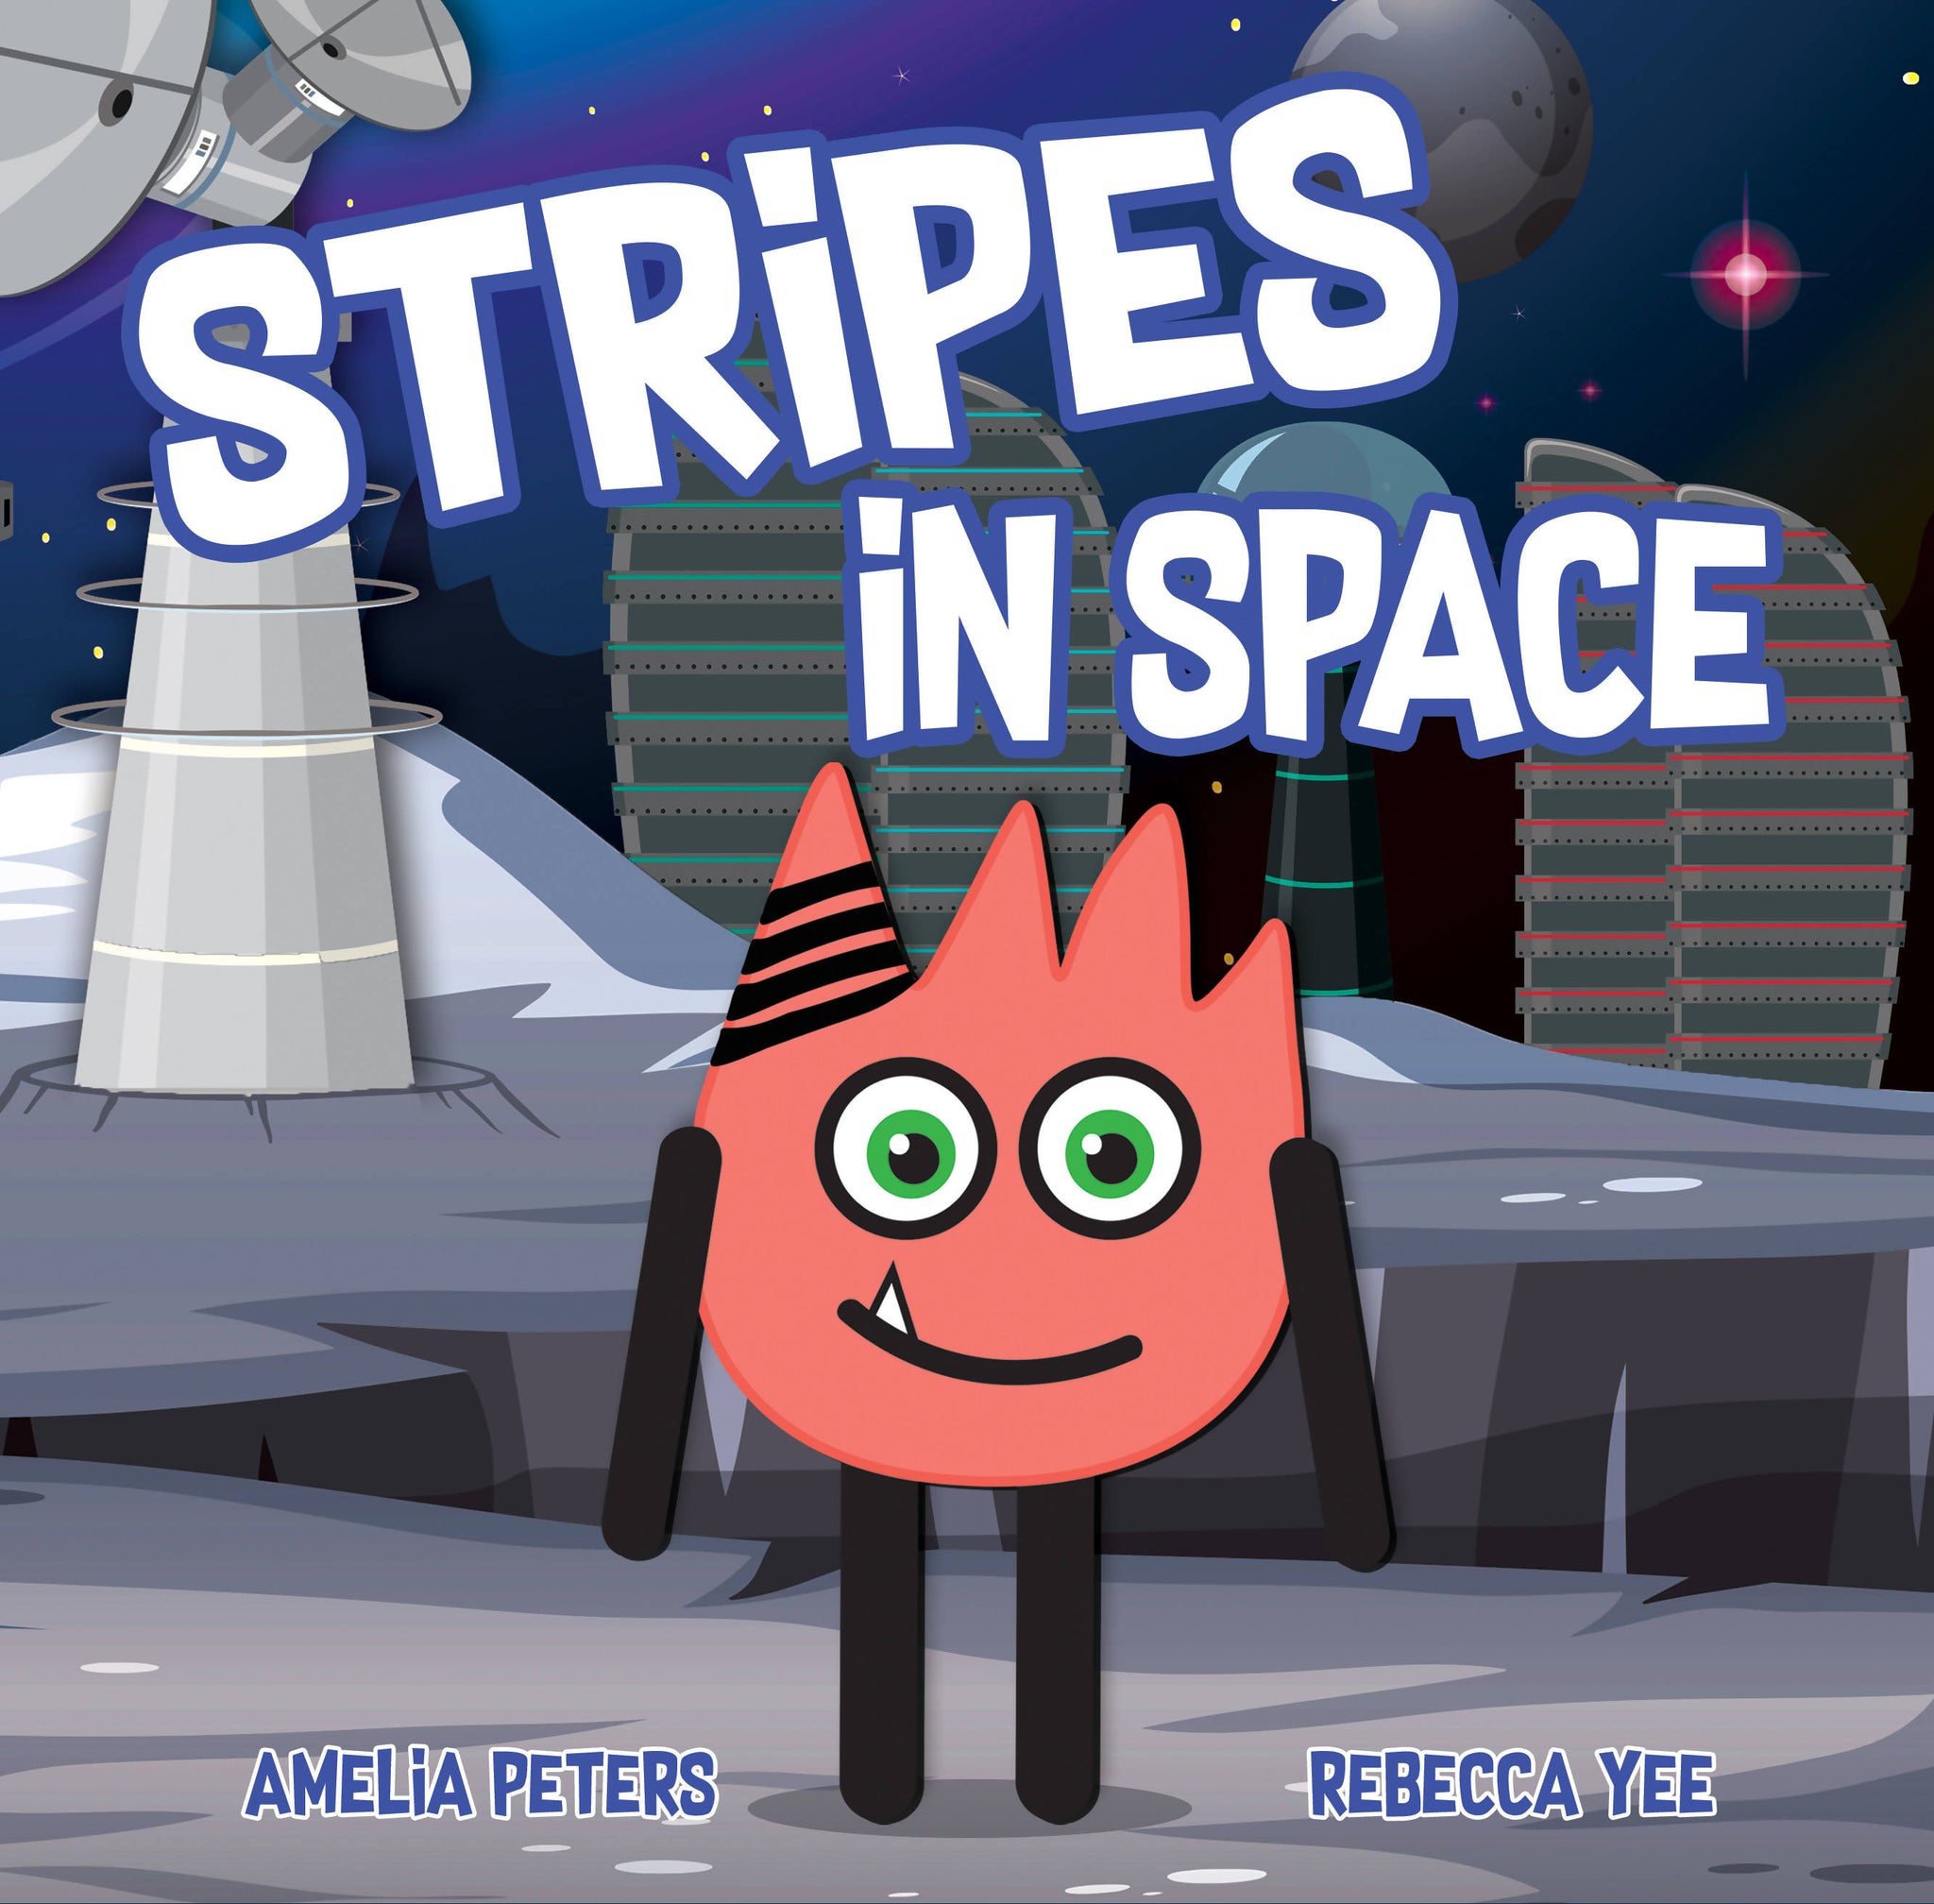 Stripes in Space